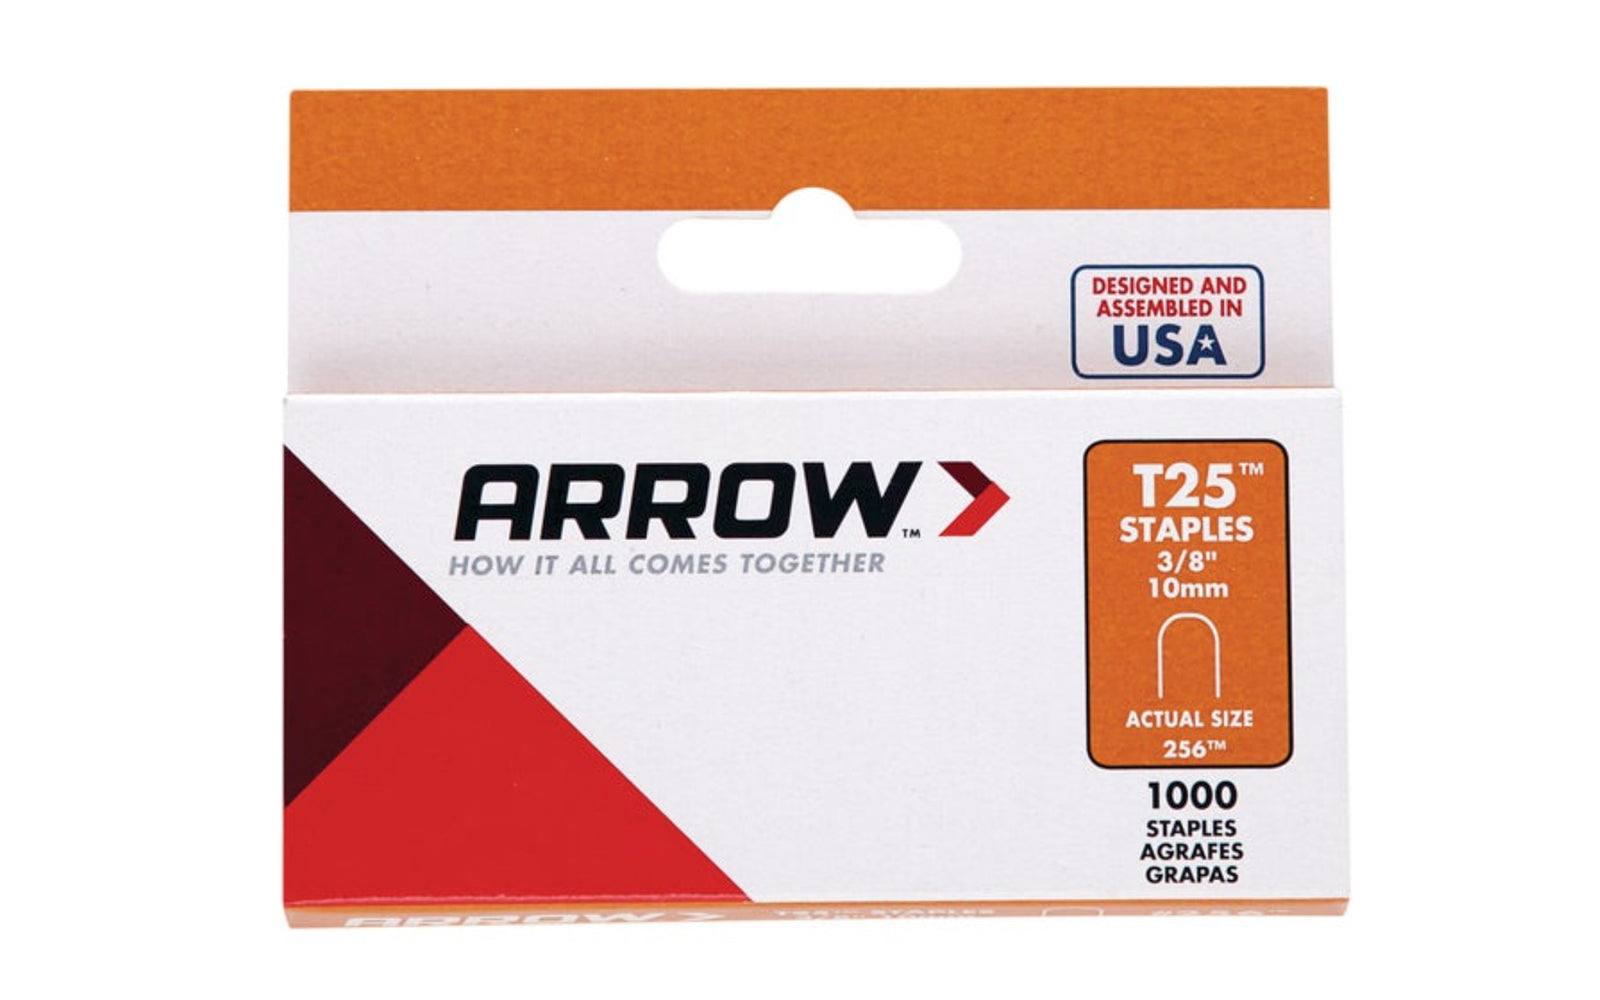 Arrow T25 Round Crown Cable 3/8" Staples - 1000 PK. Fits wire up to 1/4 in diameter. Good for CAT 5, Telephone Wiring, Speaker Wire.  Designed & assembled in USA. 079055250388